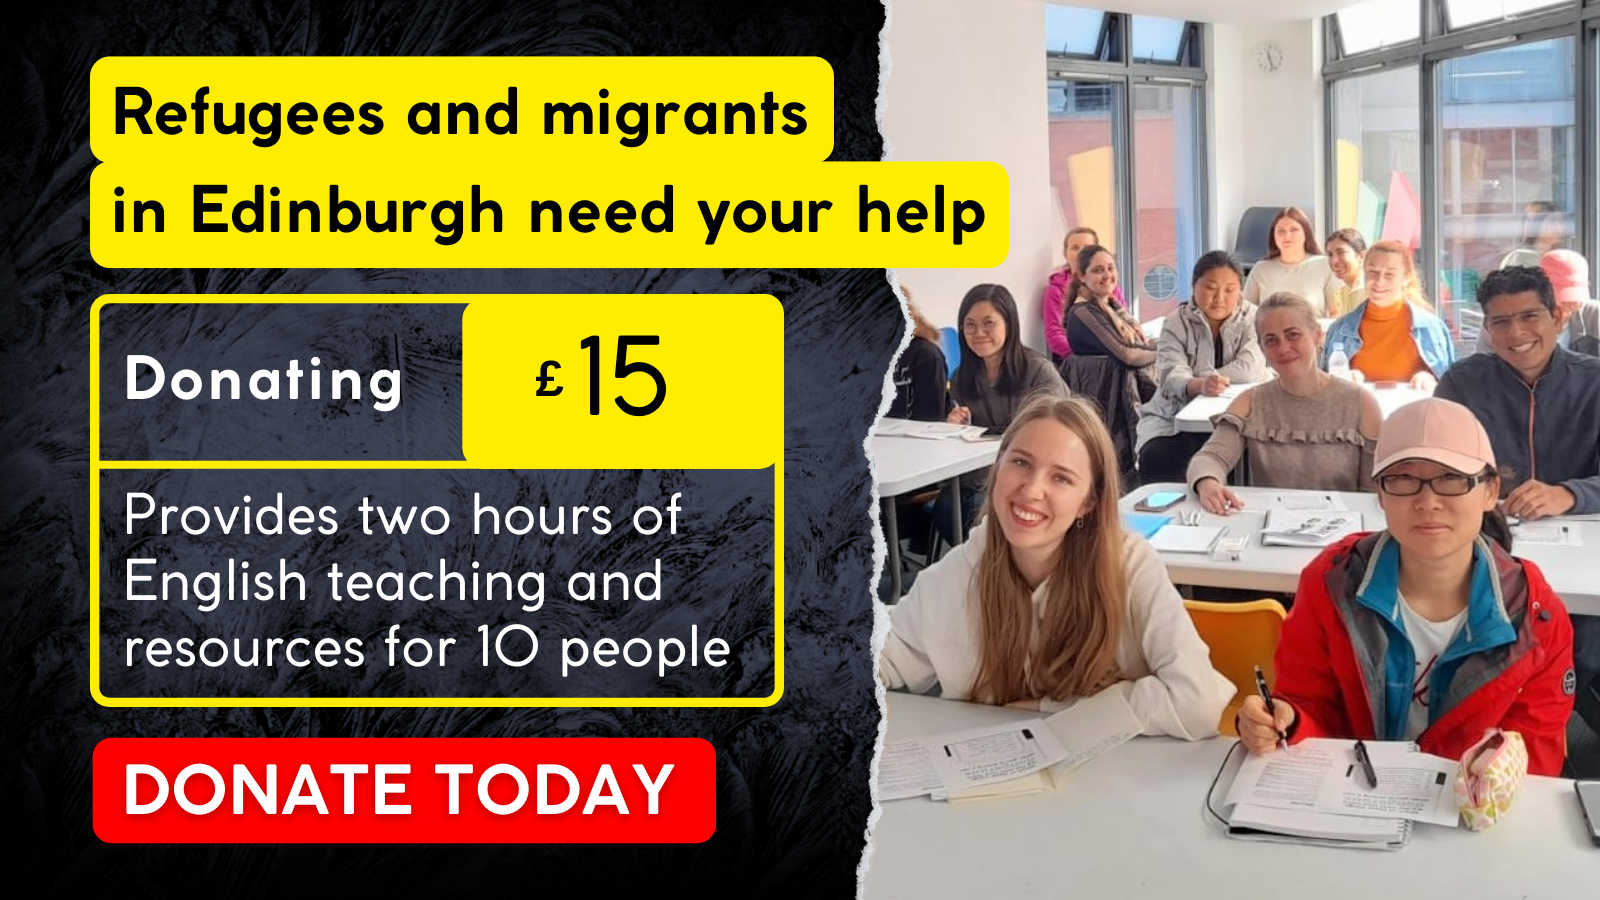 Donating £15 provides two hours of English teaching and resources for ten people